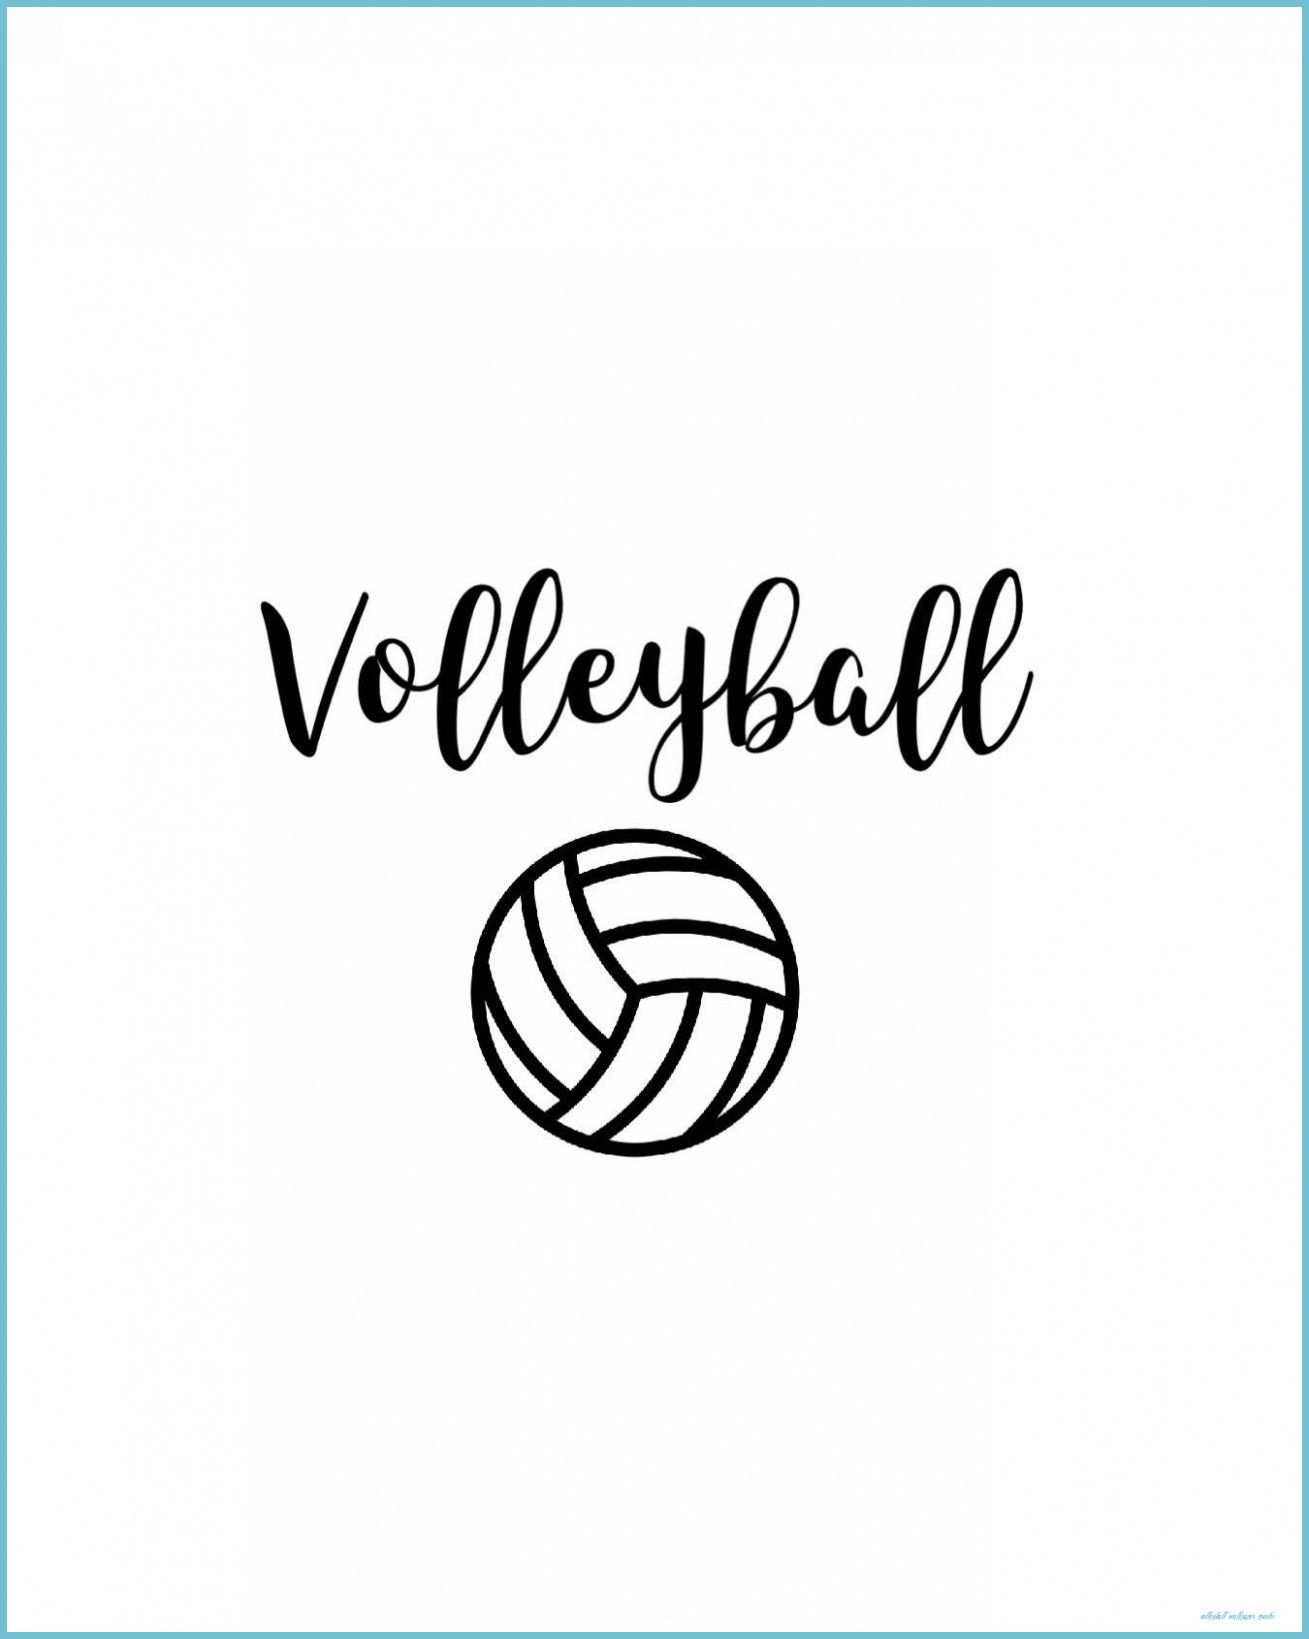 Volleyball word art with a volleyball graphic - Volleyball